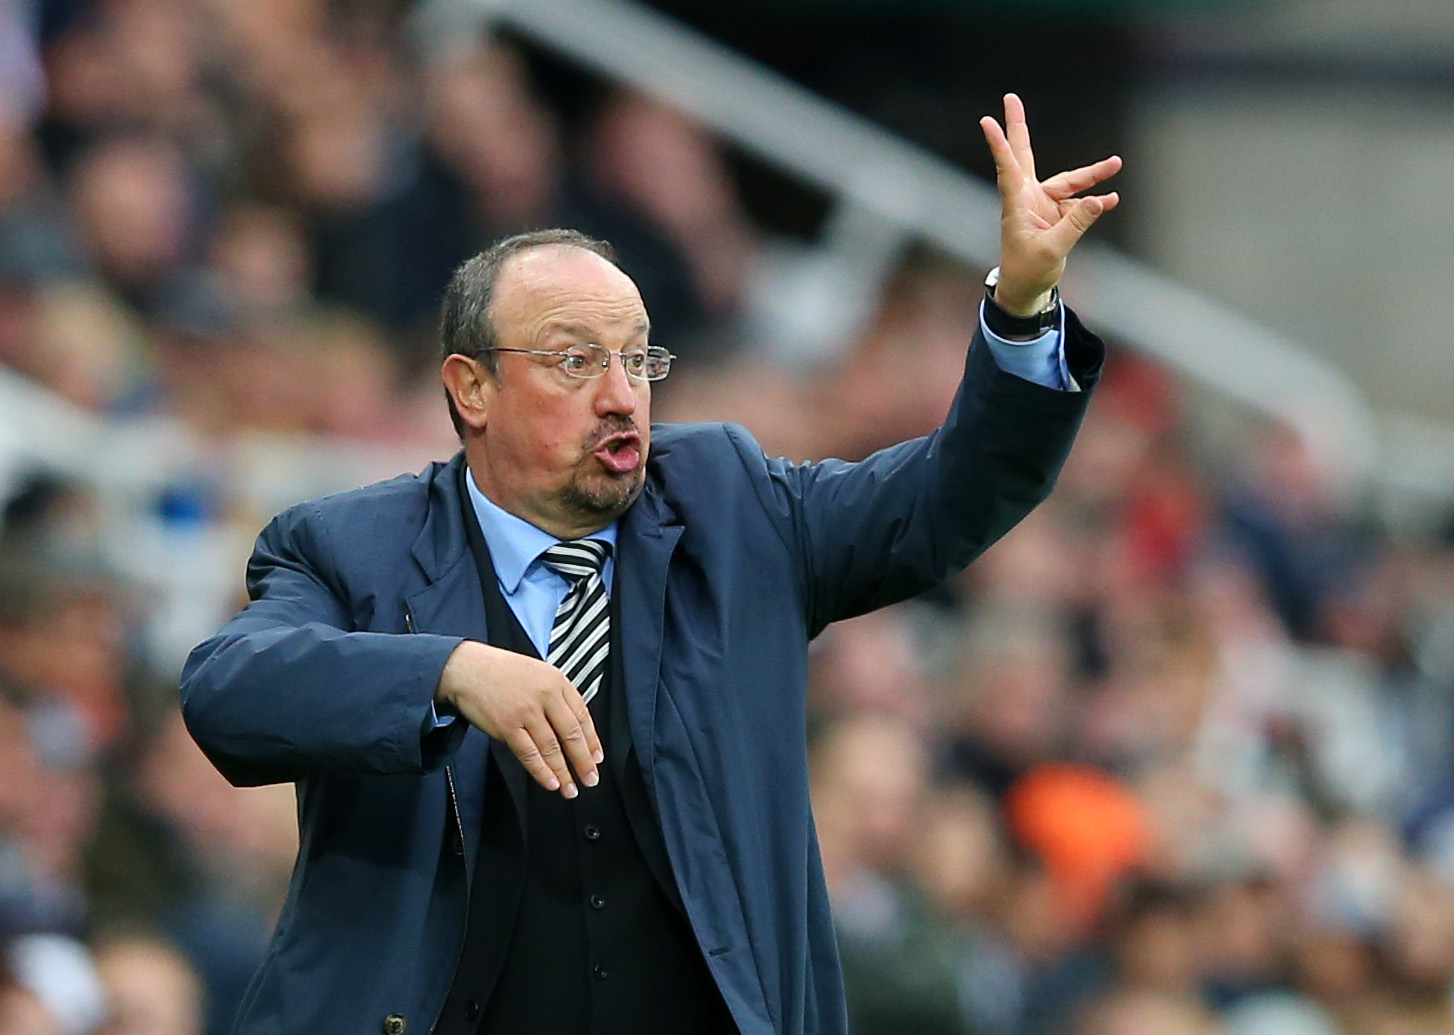 NEWCASTLE UPON TYNE, ENGLAND - AUGUST 26:  Rafael Benitez, Manager of Newcastle United gives his team instructions during the Premier League match between Newcastle United and Chelsea FC at St. James Park on August 26, 2018 in Newcastle upon Tyne, United Kingdom.  (Photo by Alex Livesey/Getty Images)